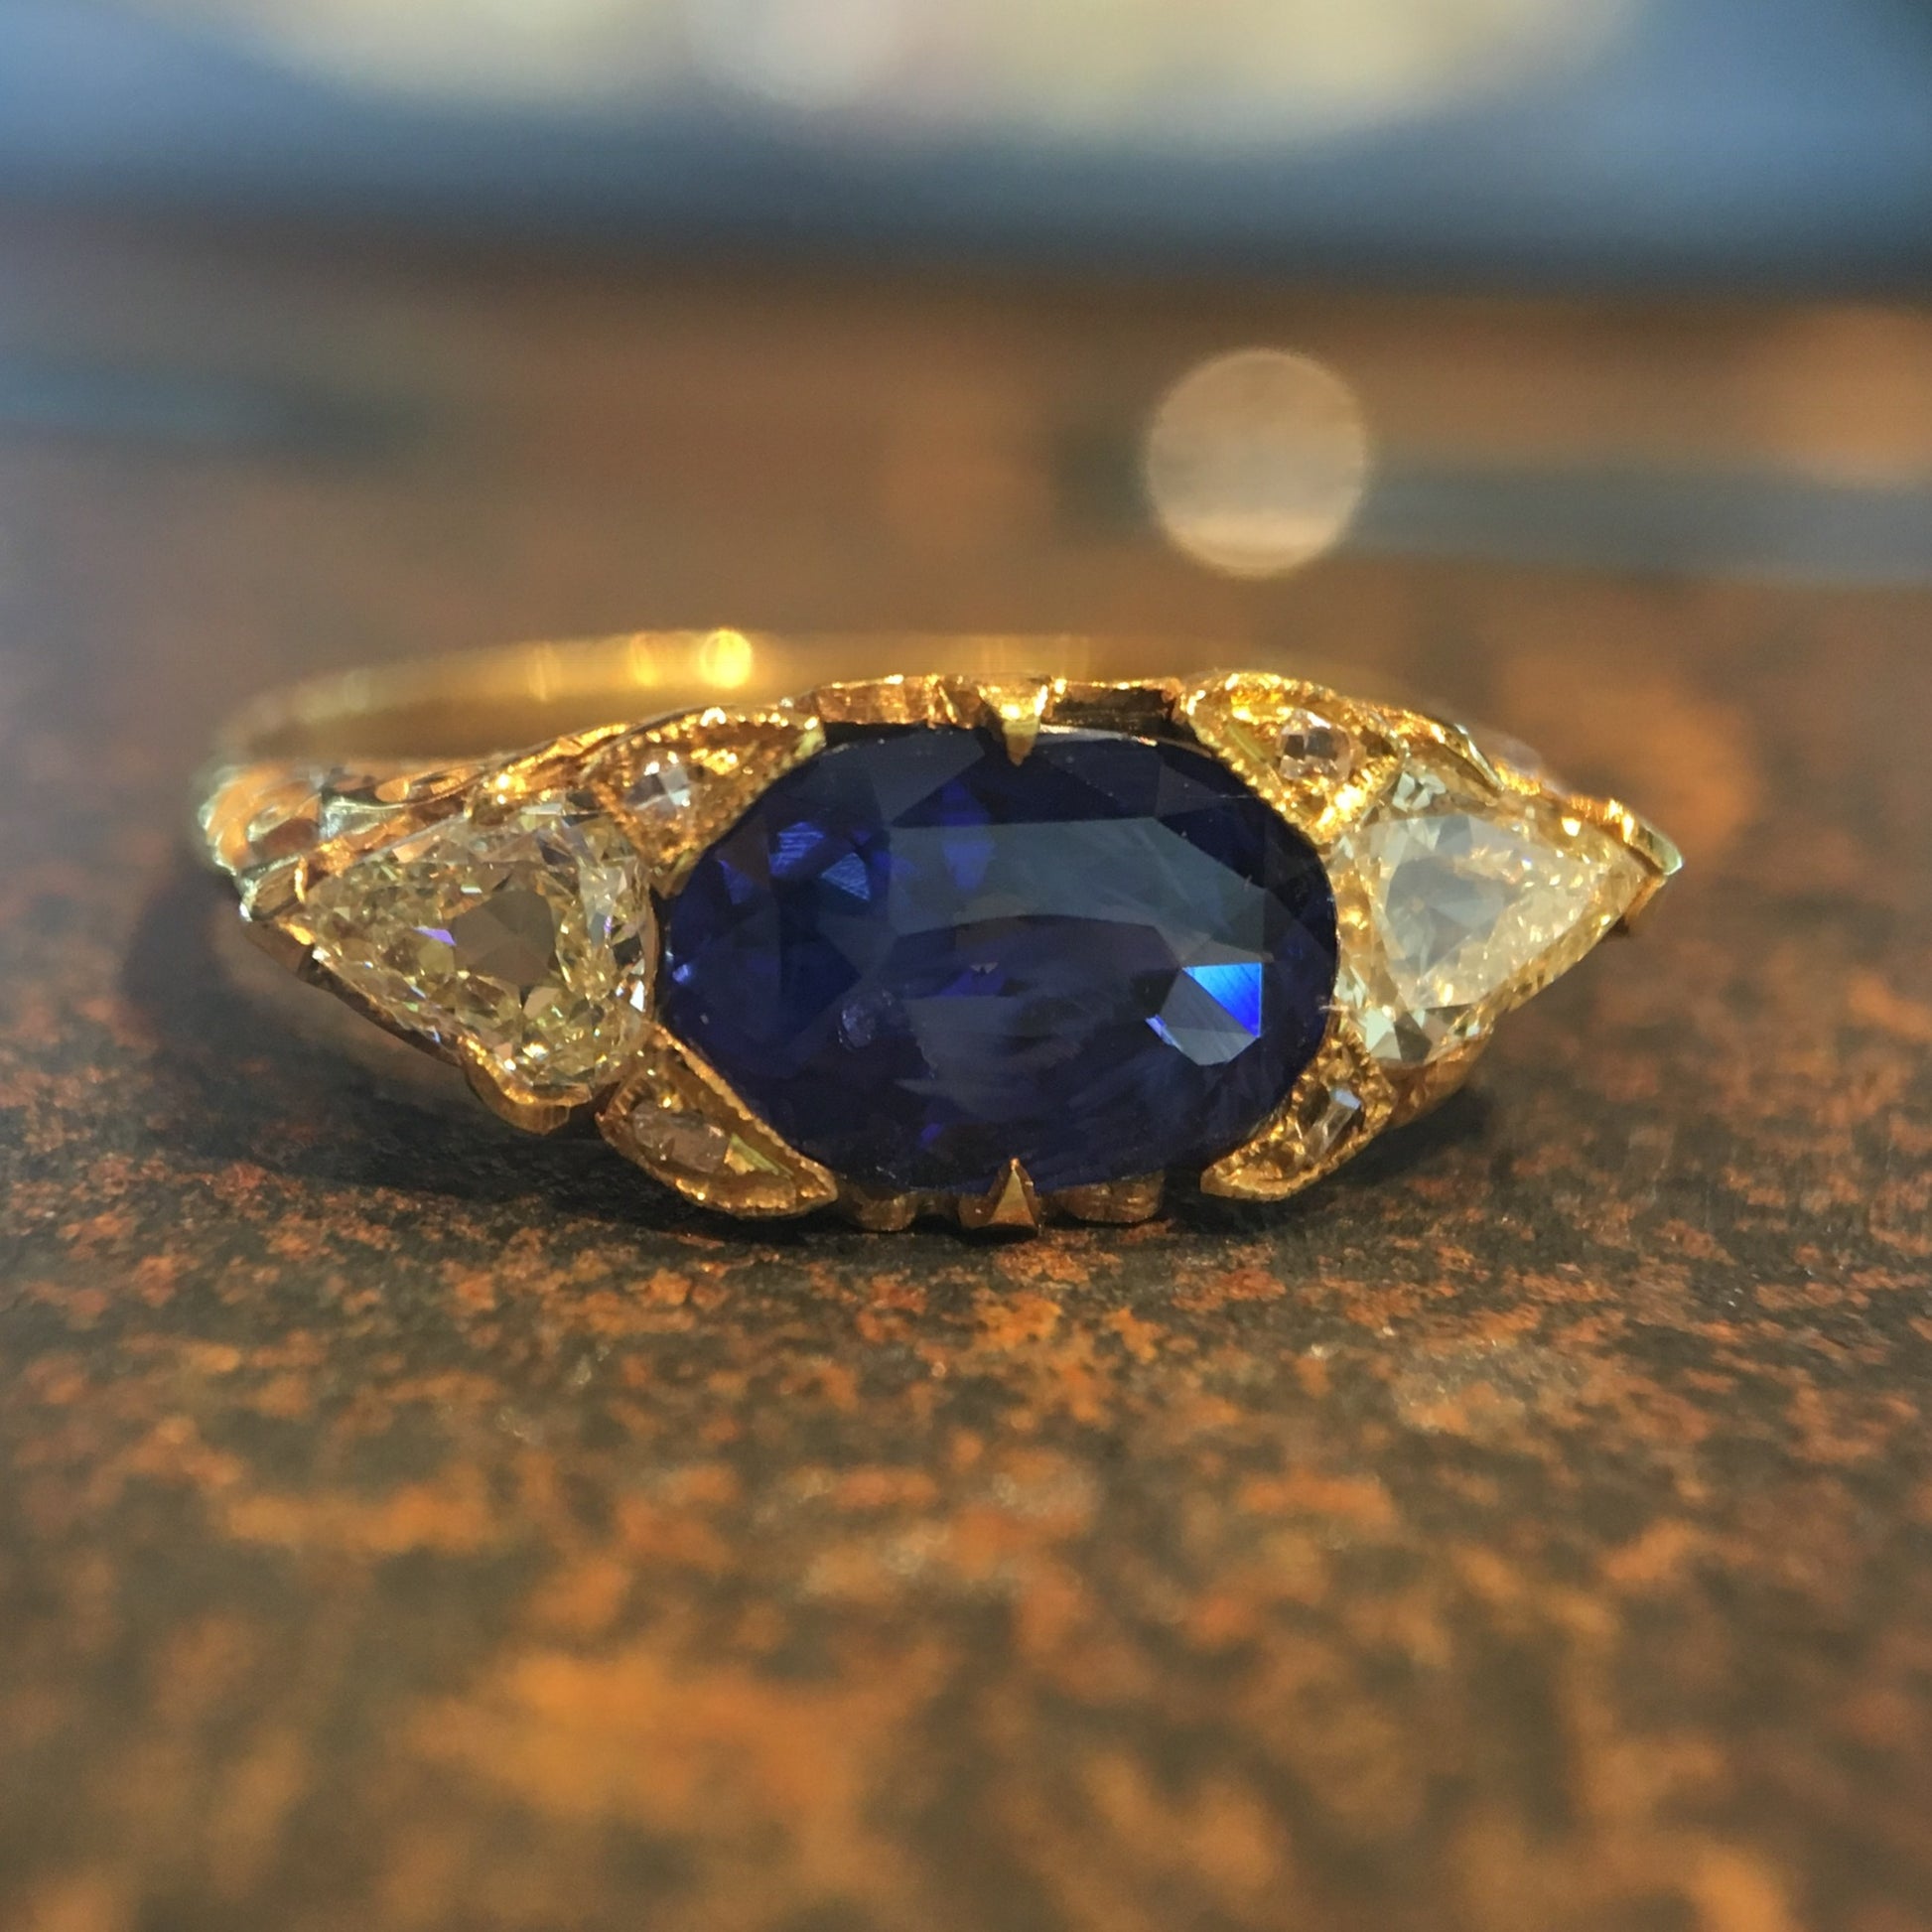 Modern Right Hand Ring 2.21 Oval Cut Sapphire & .53 Pear Cut Diamonds in 18K Yellow GoldComposition: Platinum Ring Size: 6.25 Total Diamond Weight: .53 cttwct Total Gram Weight: 2.73 rams g